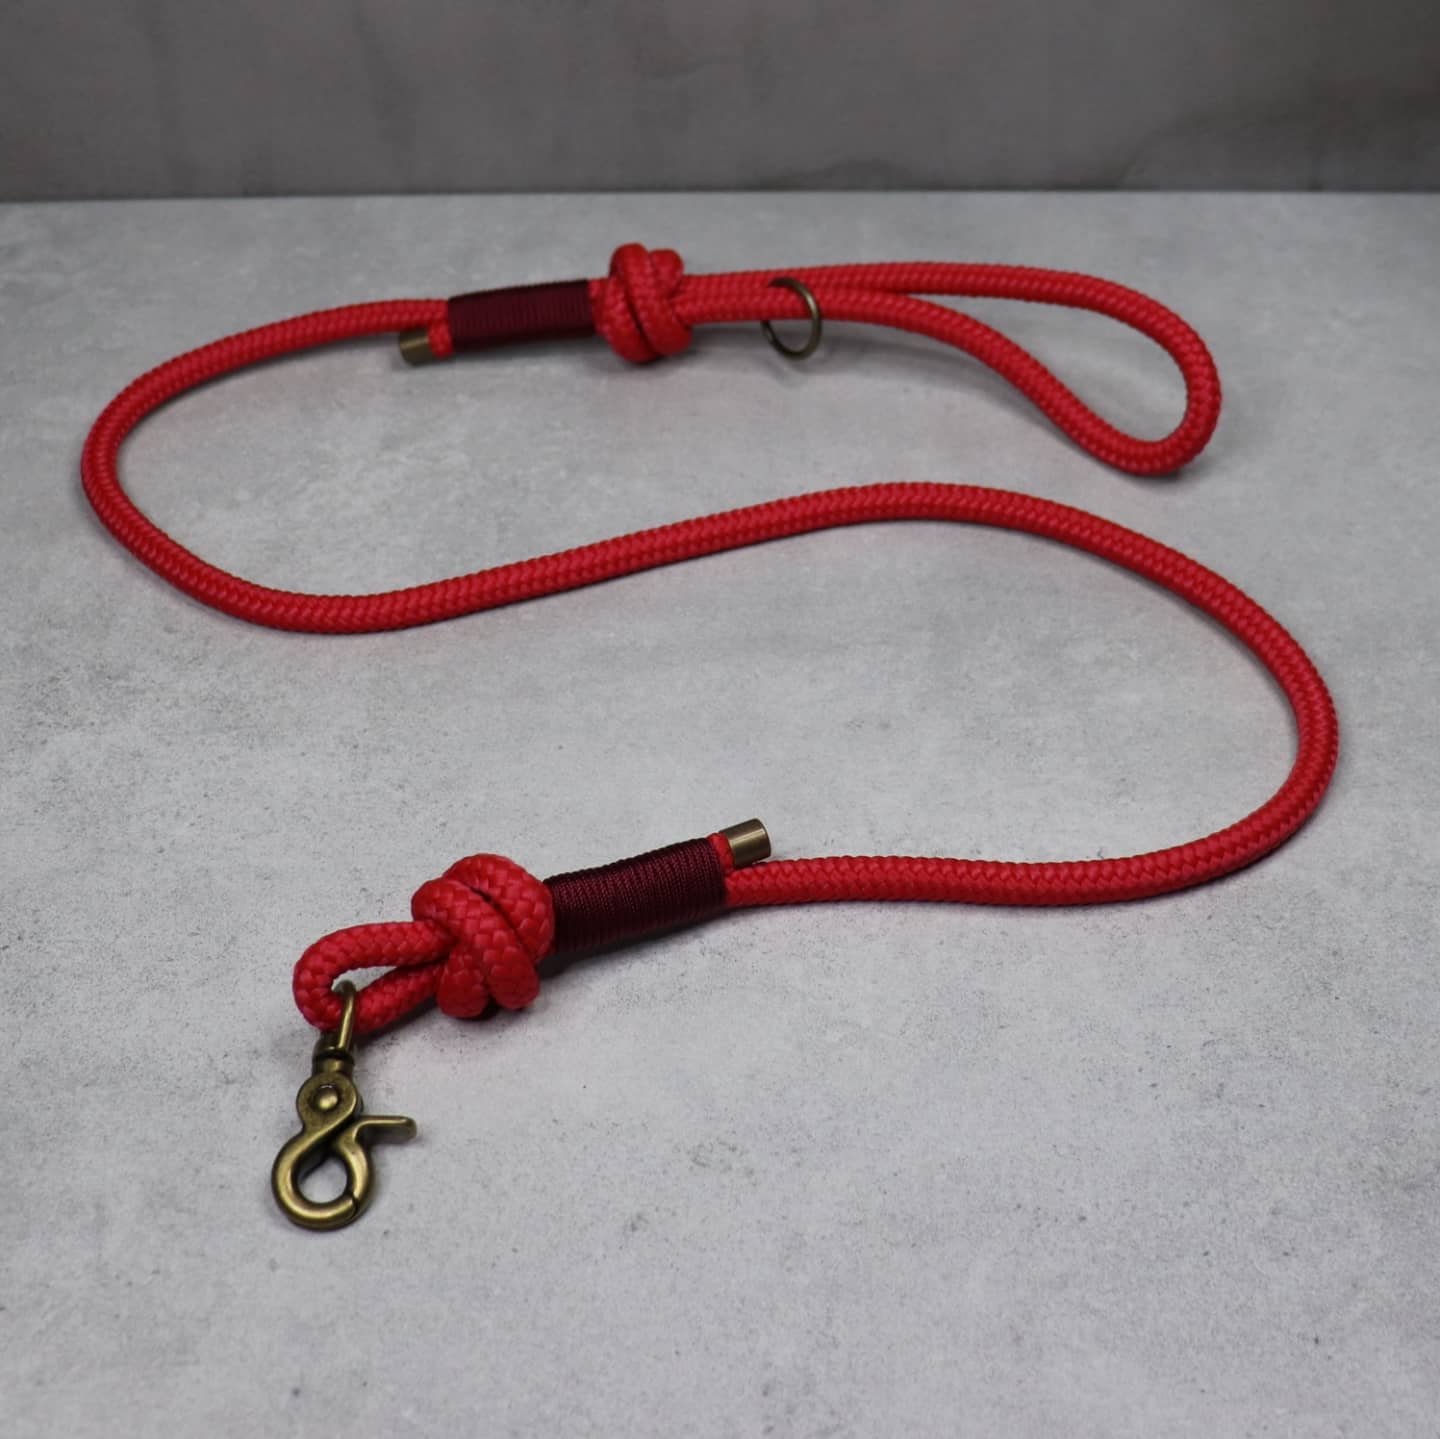 Cross knot rope lead - Design your own